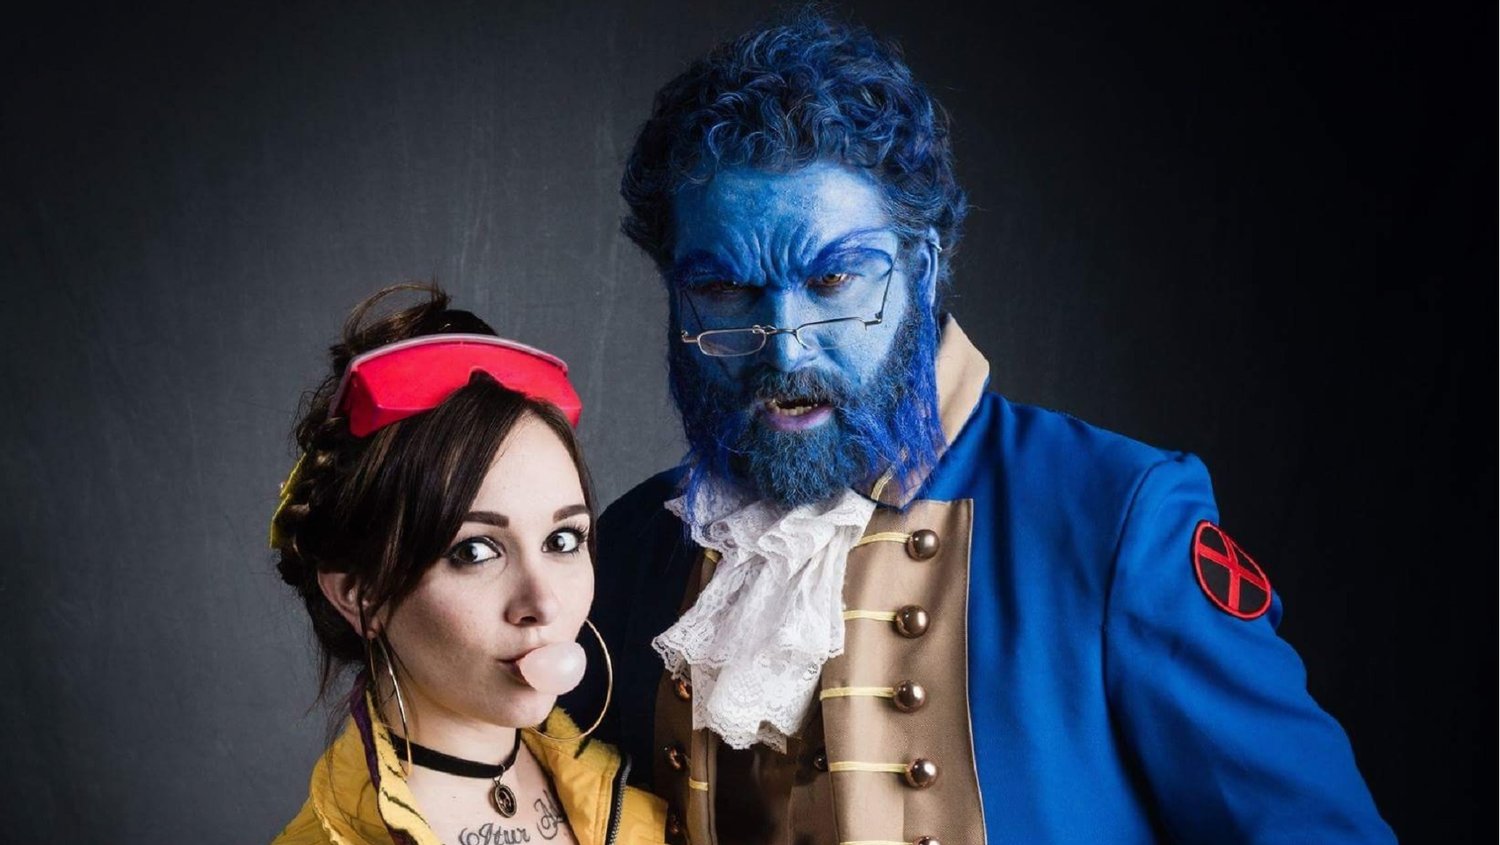 BEAUTY AND THE BEAST Get an X-MEN Makeover in This Phenomenal Cosplay! 